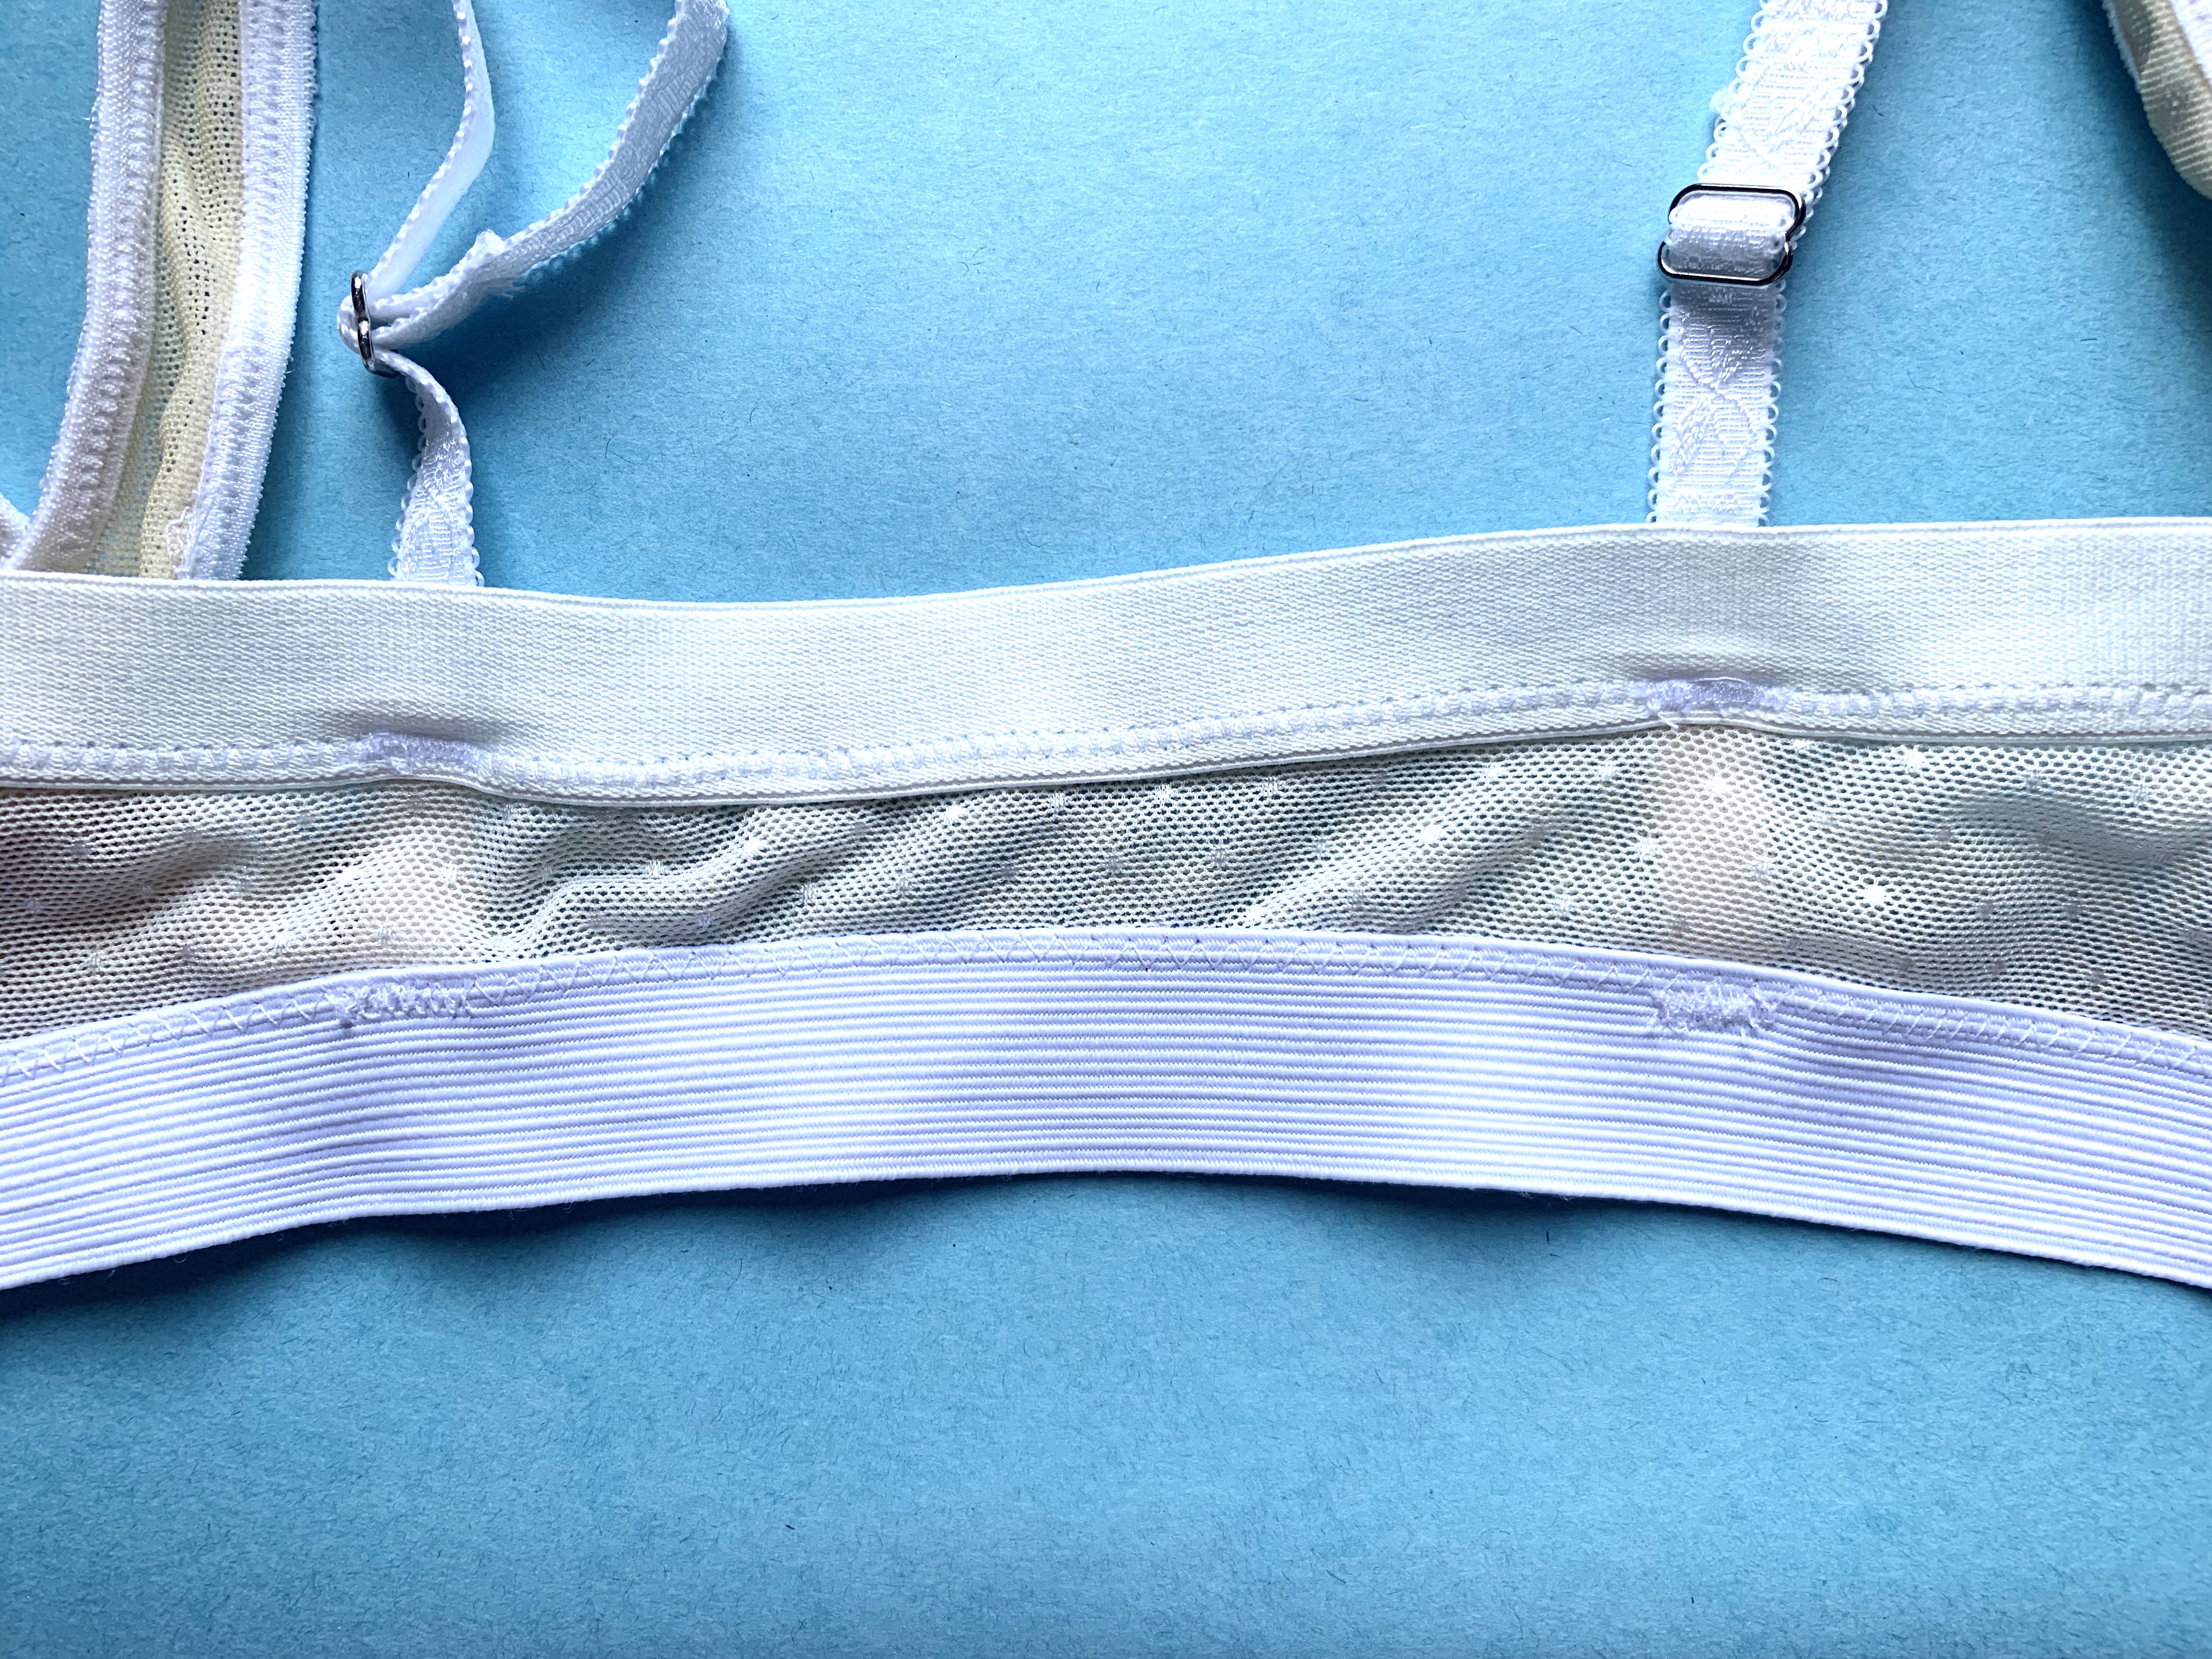 Bra Making: How To Sew A Hook and Eye - WeAllSew